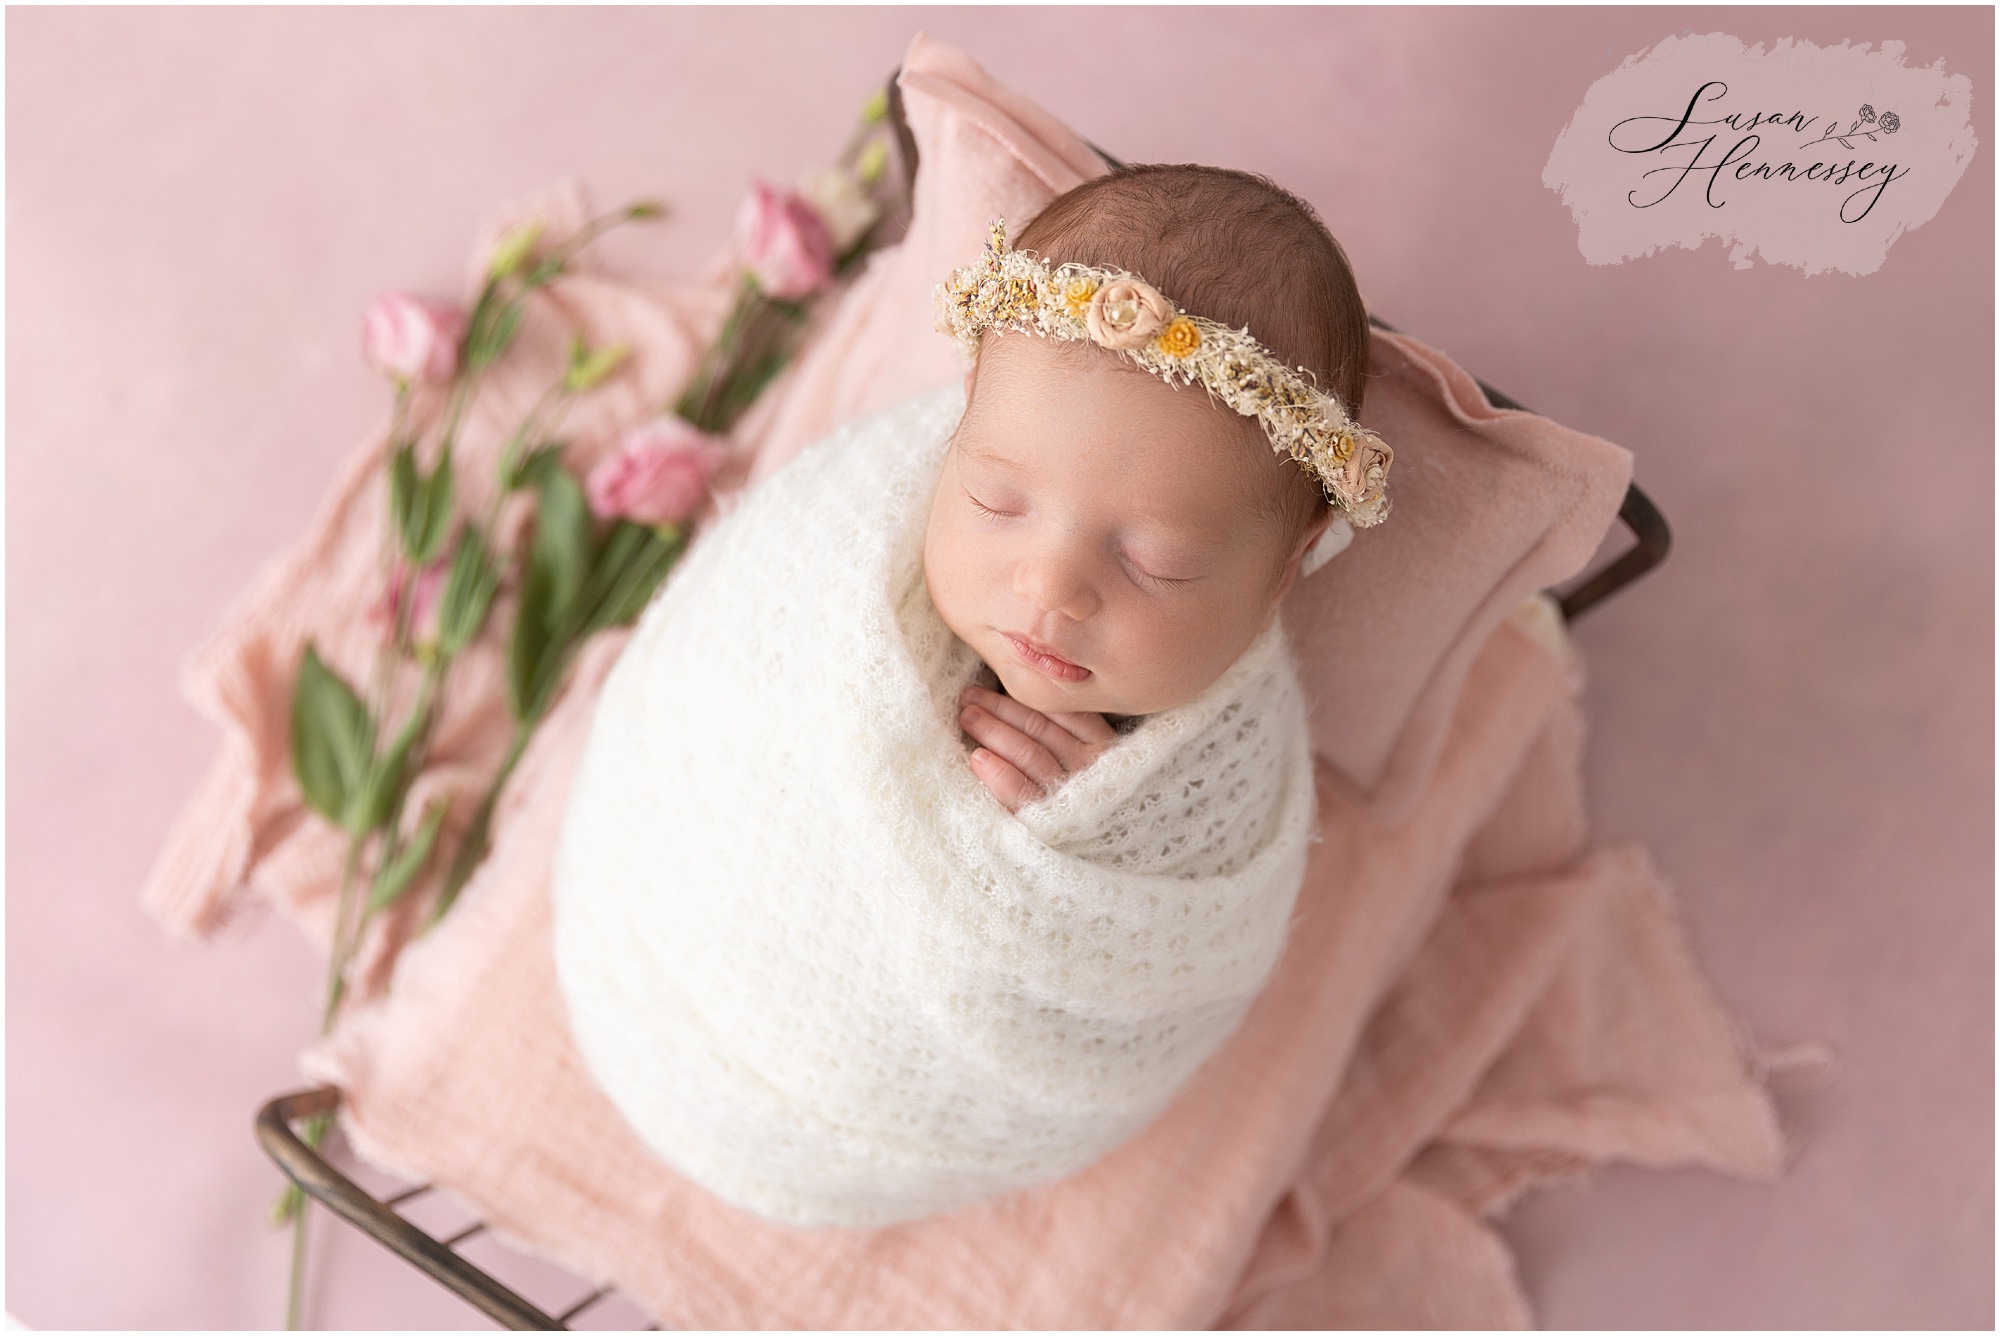 South Jersey newborn photography with delicate details, featuring florals, whites and pinks.